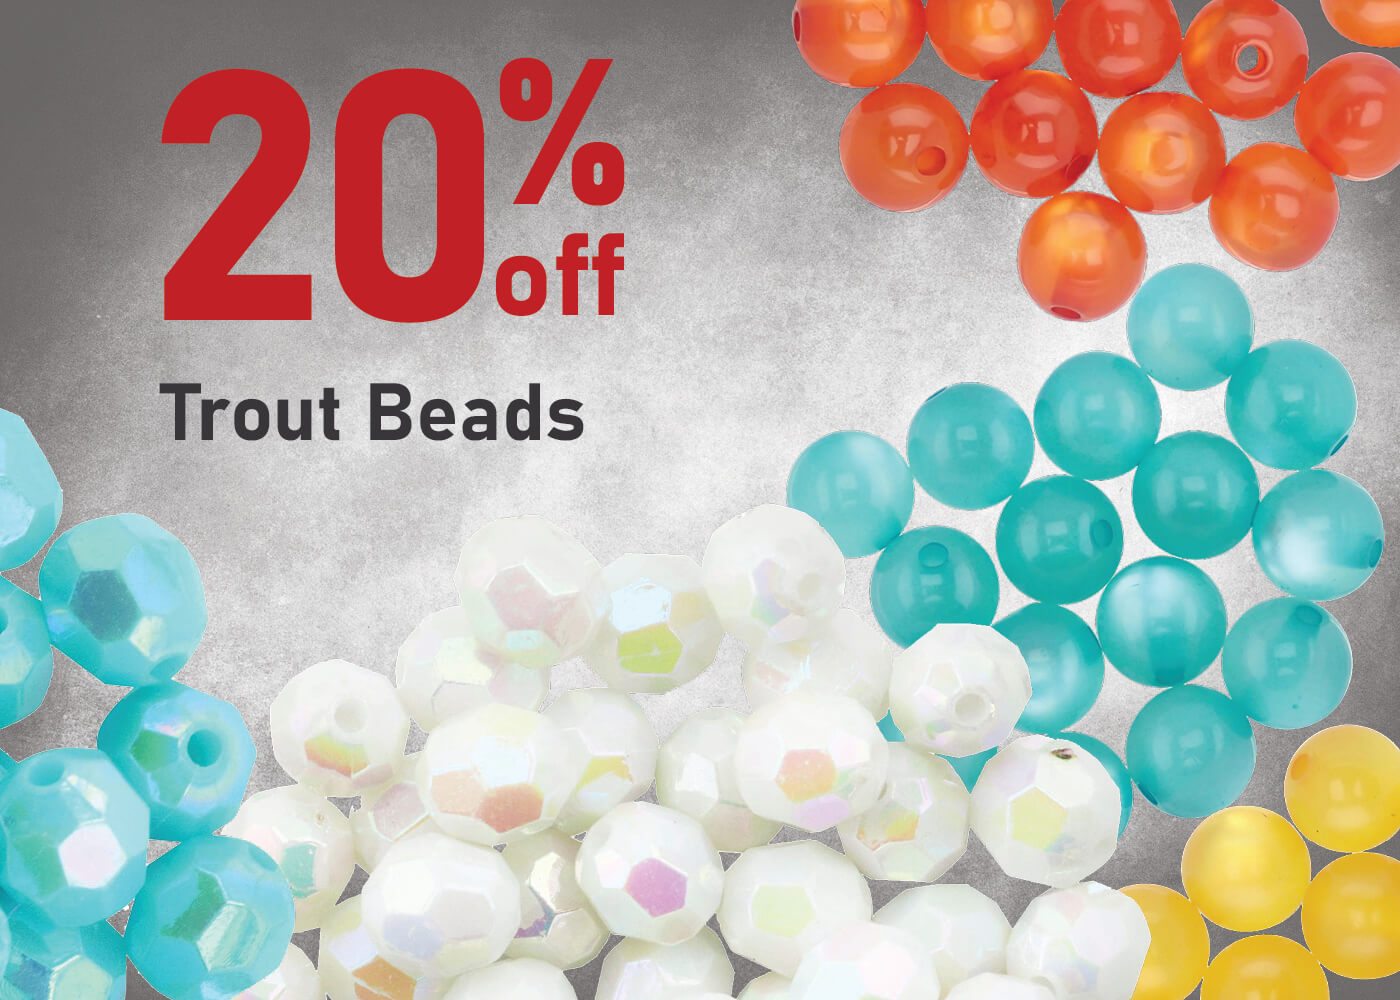 Take 20% off Trout Beads